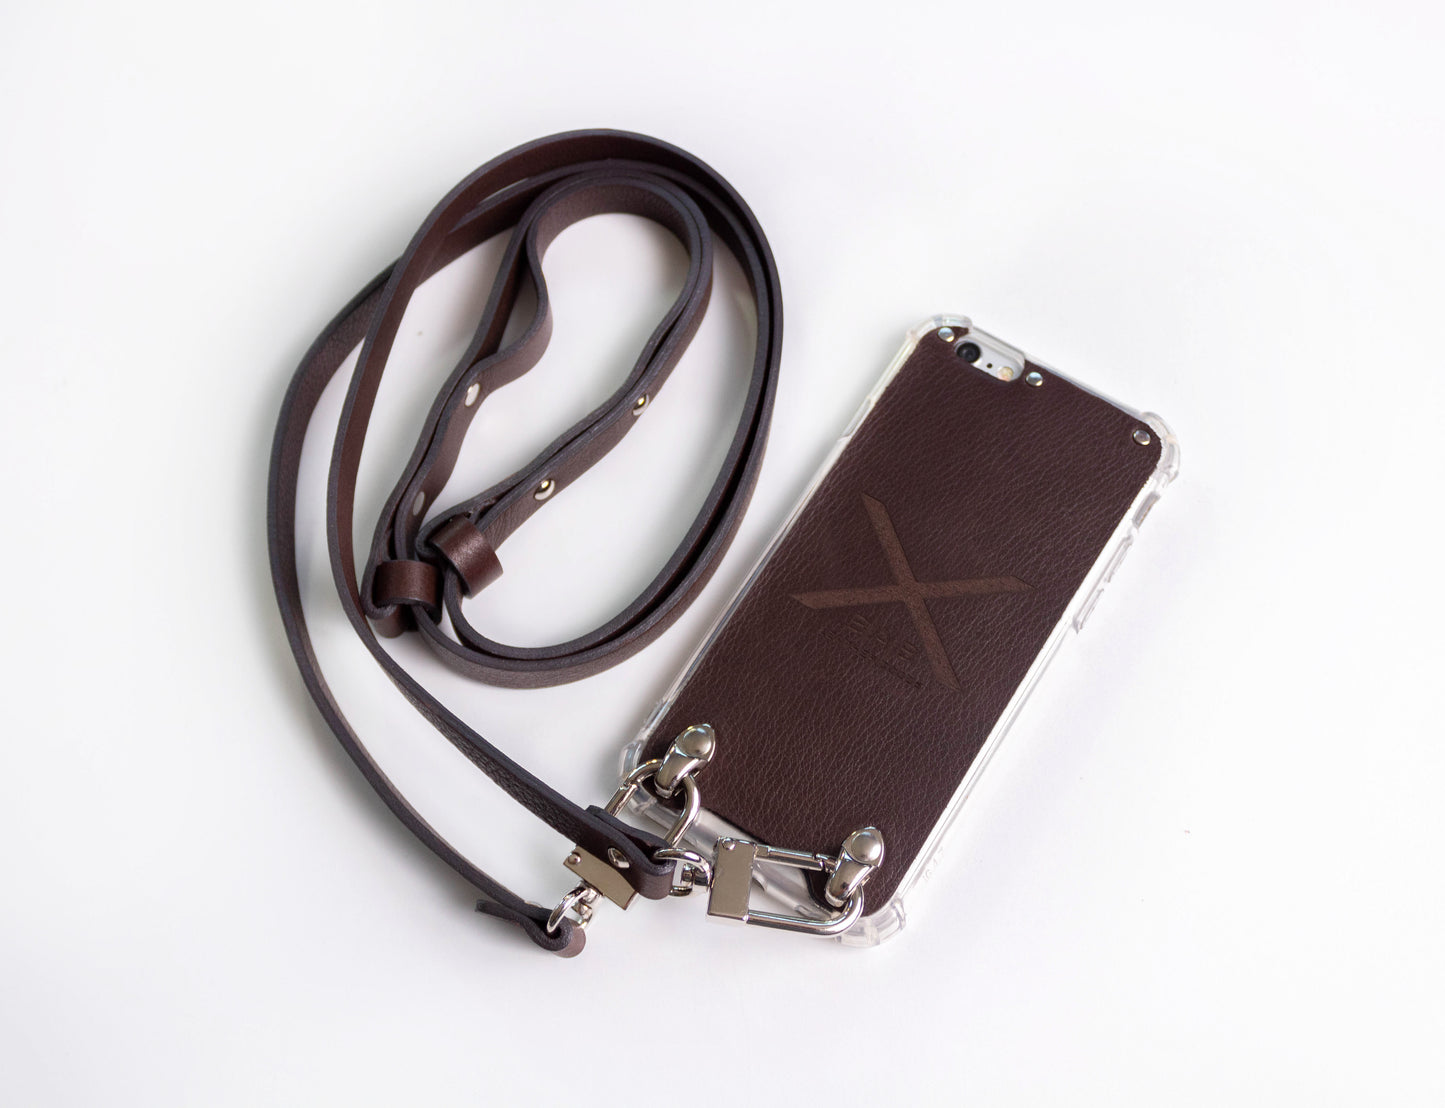 Full-Grain Genuine vegetable-tanned Leather Case & Double Crossbody for iPhone, Blue, Brown, Black or Red.- F07